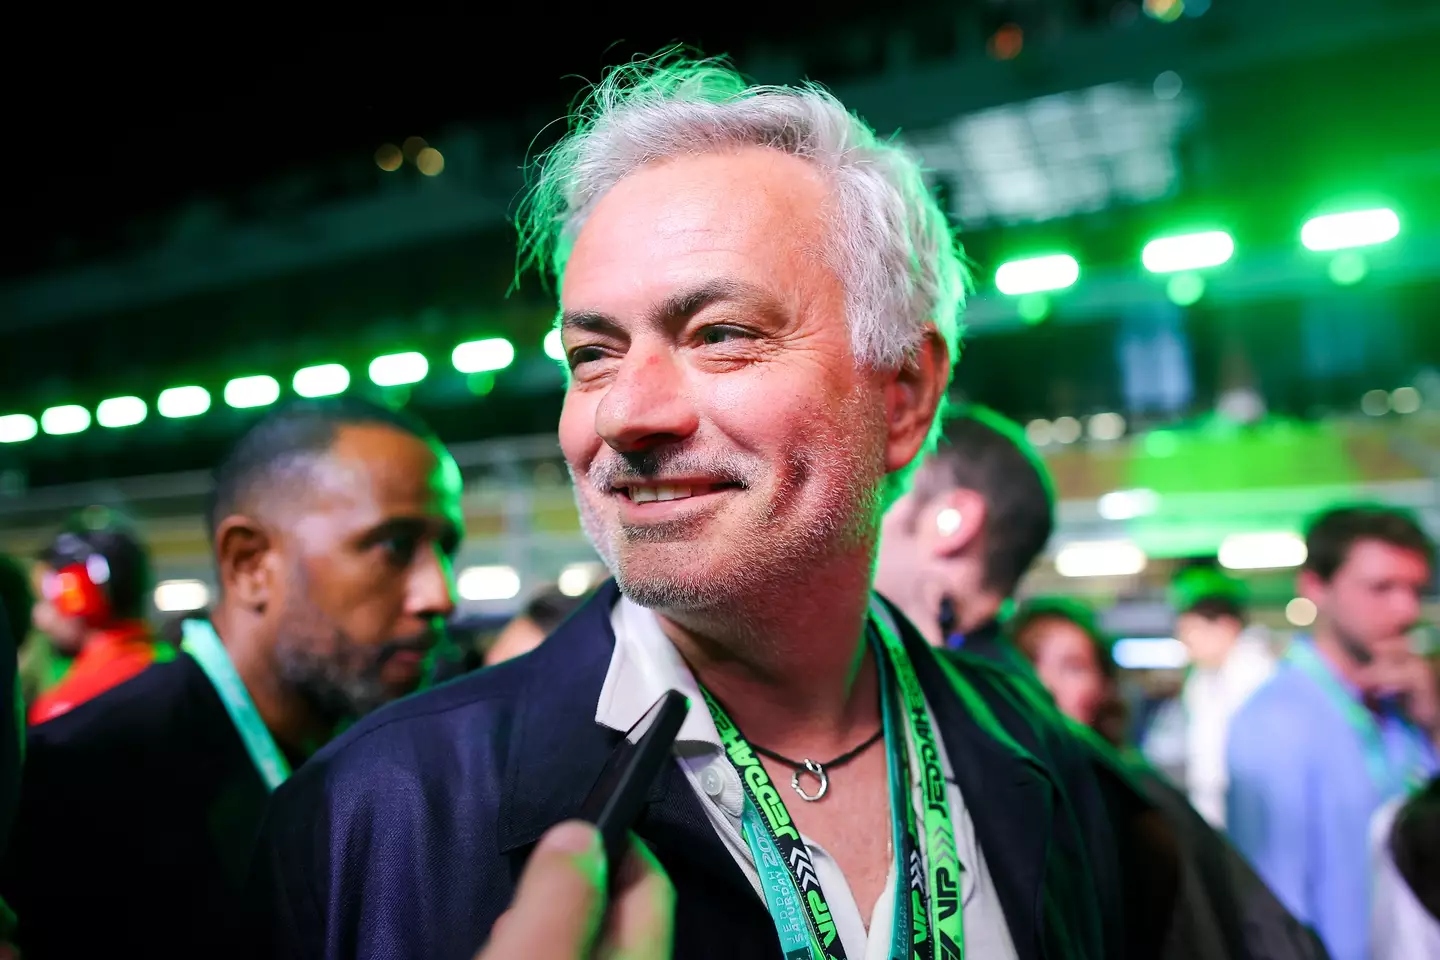 Mourinho has been spotted at various sporting events in Saudi Arabia in recent weeks (Getty)